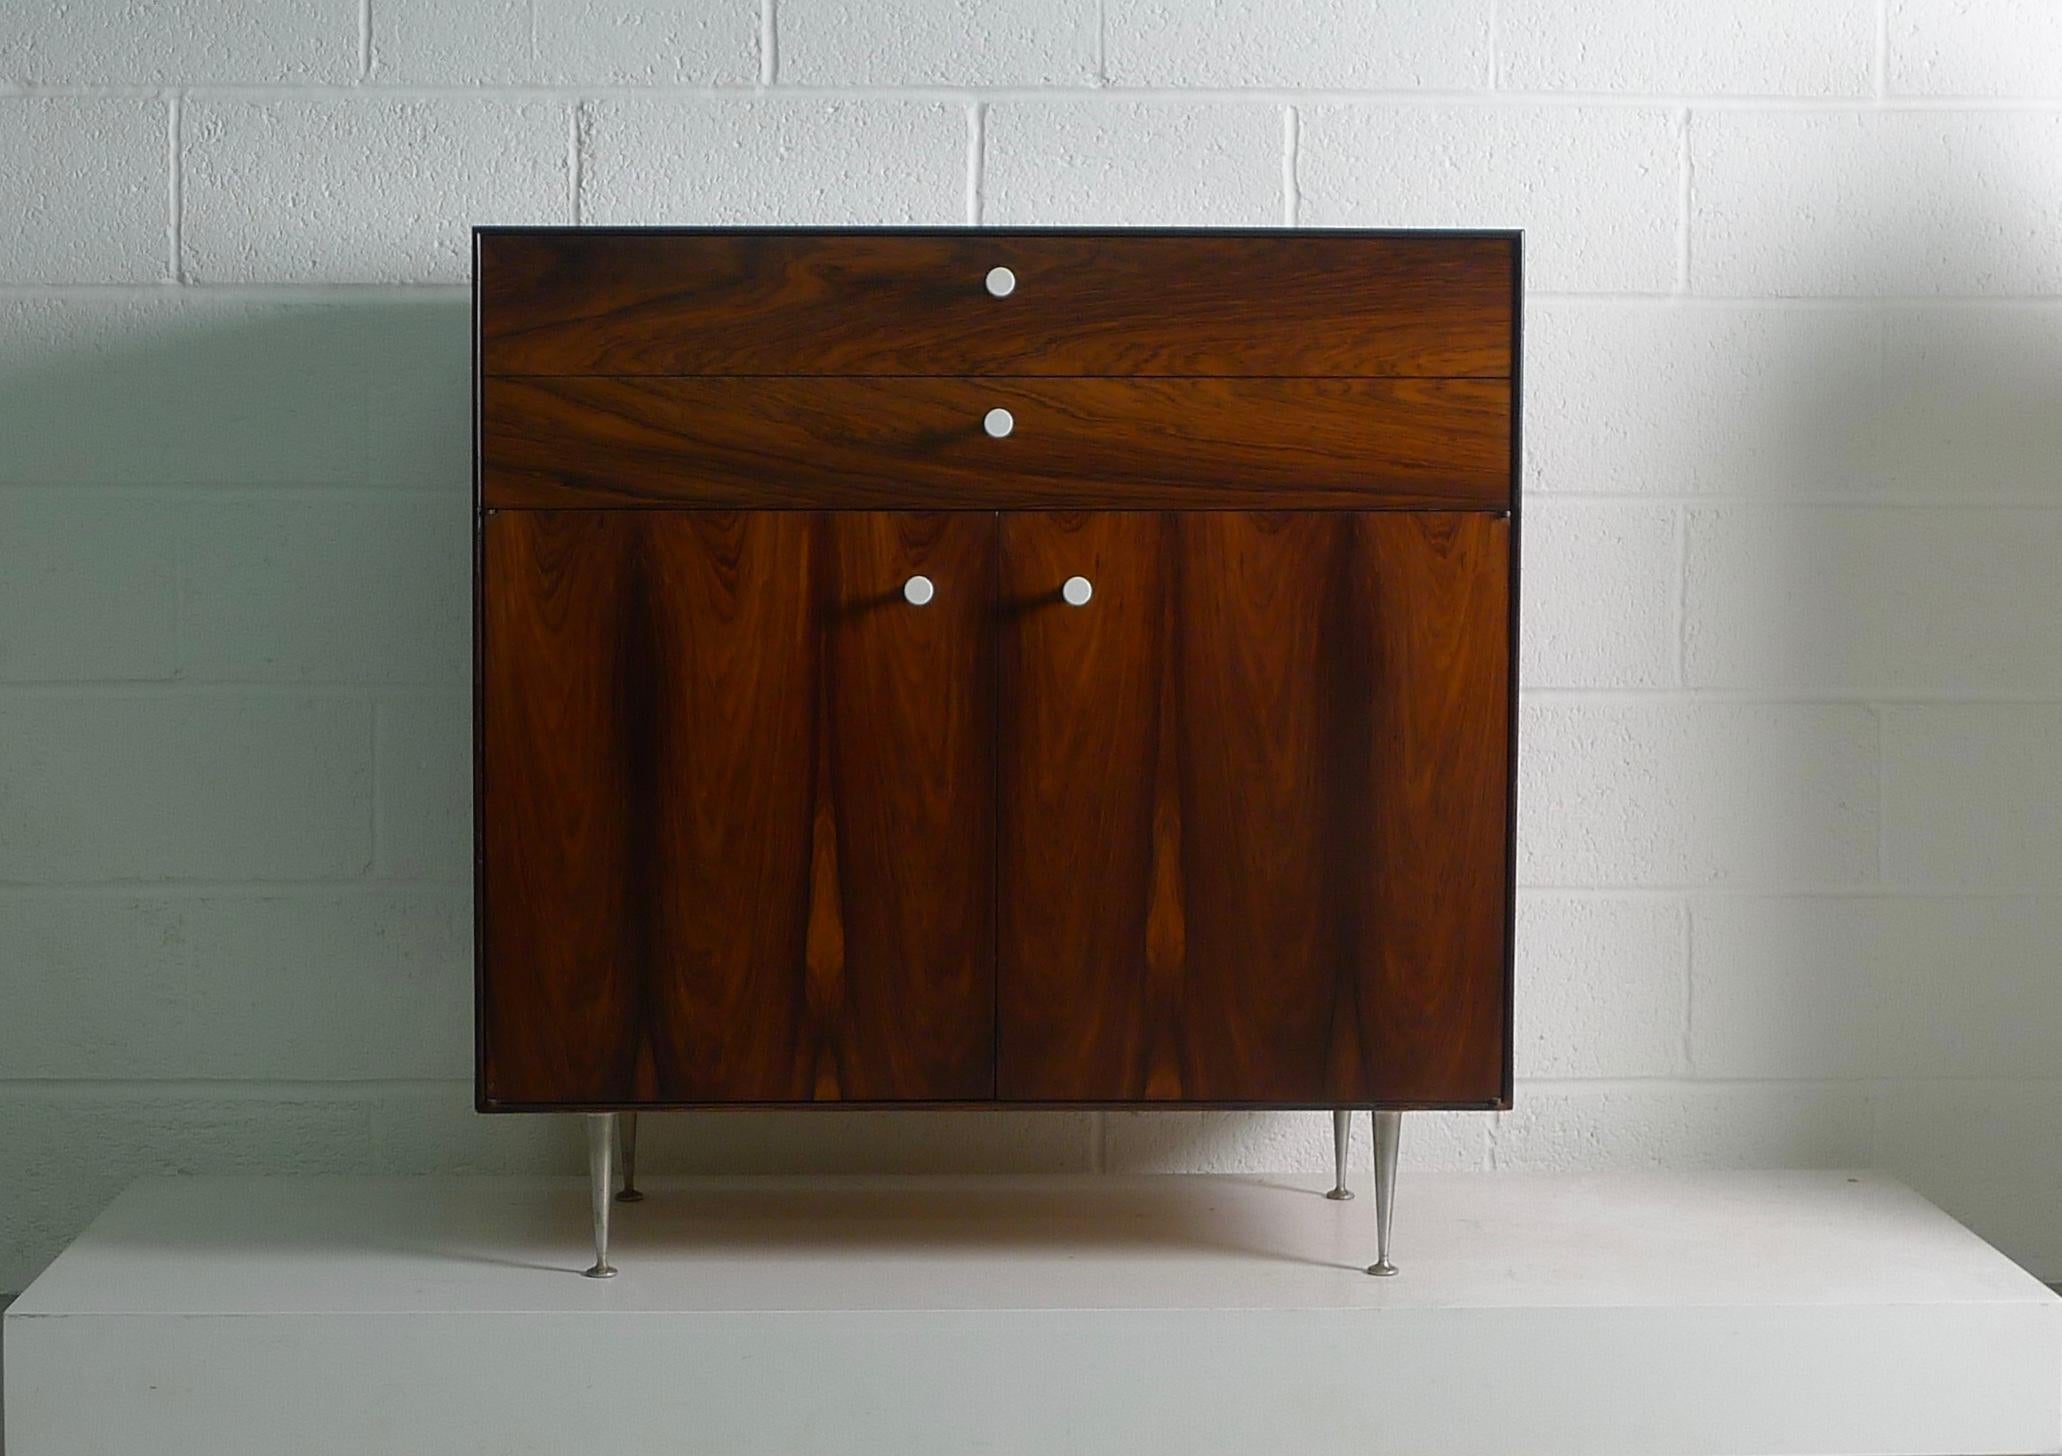 George Nelson for Herman Miller , USA circa 1955 a Thin Edge cabinet in rarely seen format of 2 drawers over 2 doors . Upper drawer with dividers and label .
Rosewood veneers are bookmatched and all hardware and internals are original .
Recently